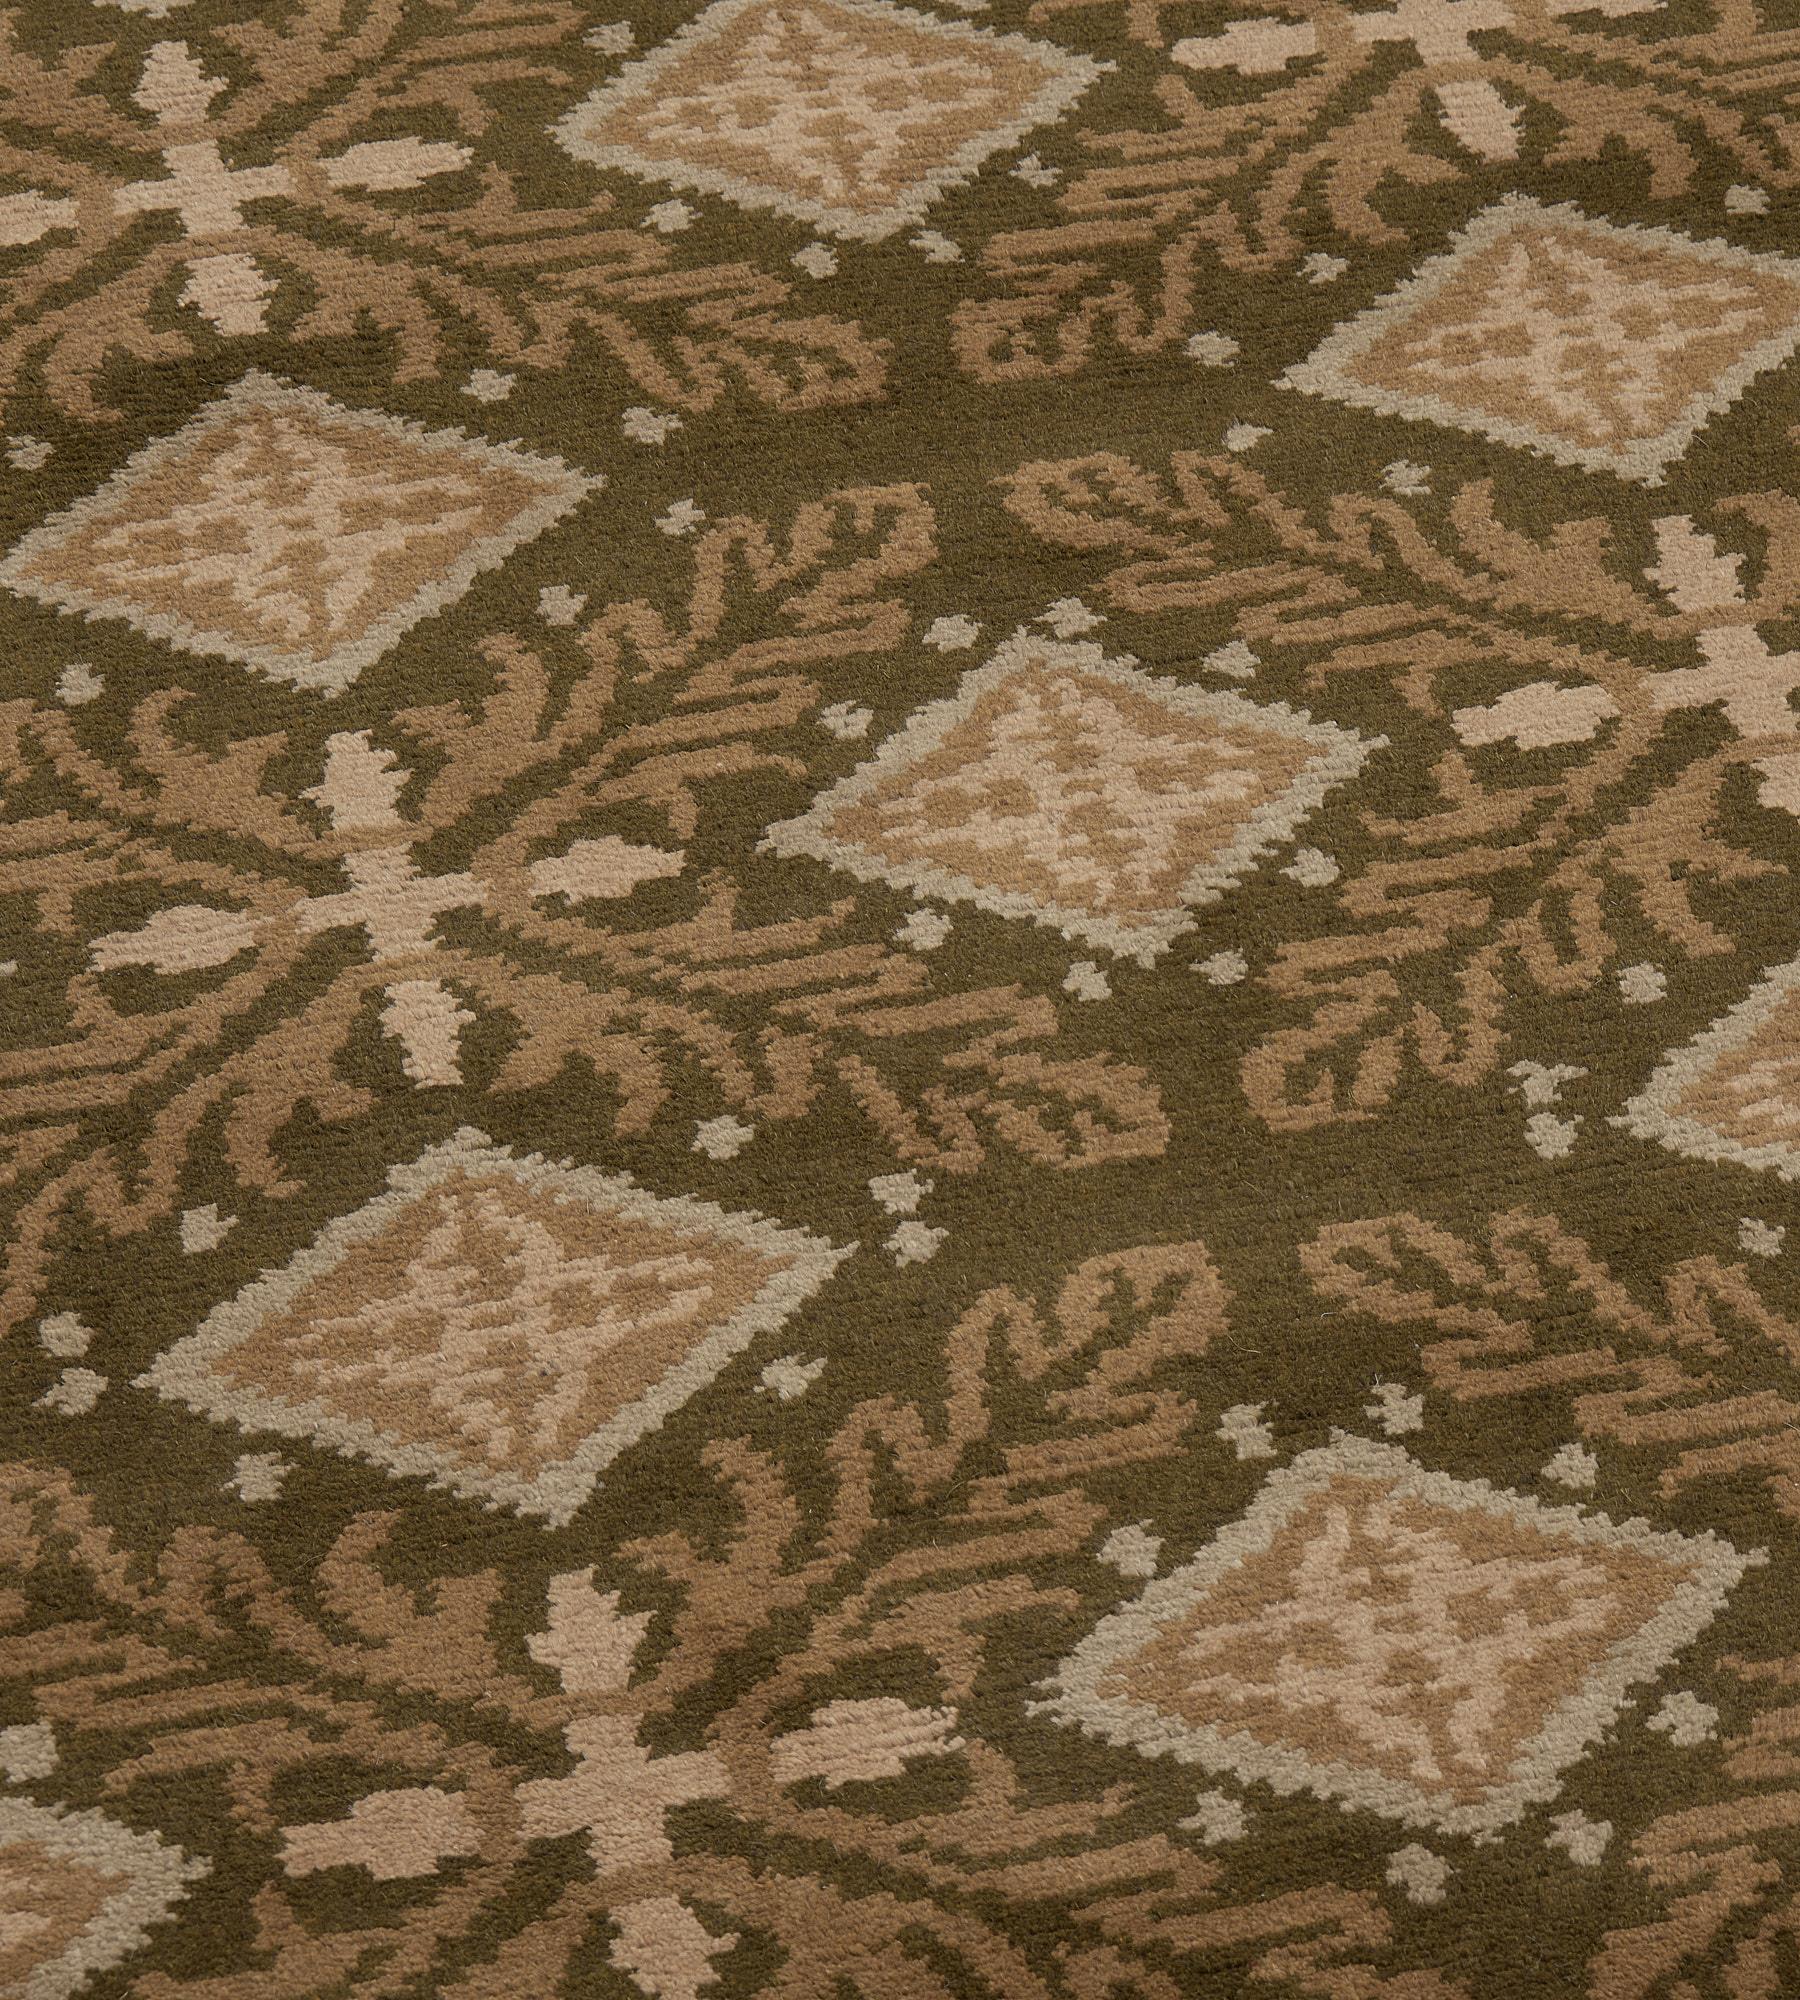 Part of the Mansour Modern collection, this revival rug is handwoven by master weavers using the finest quality techniques and materials.